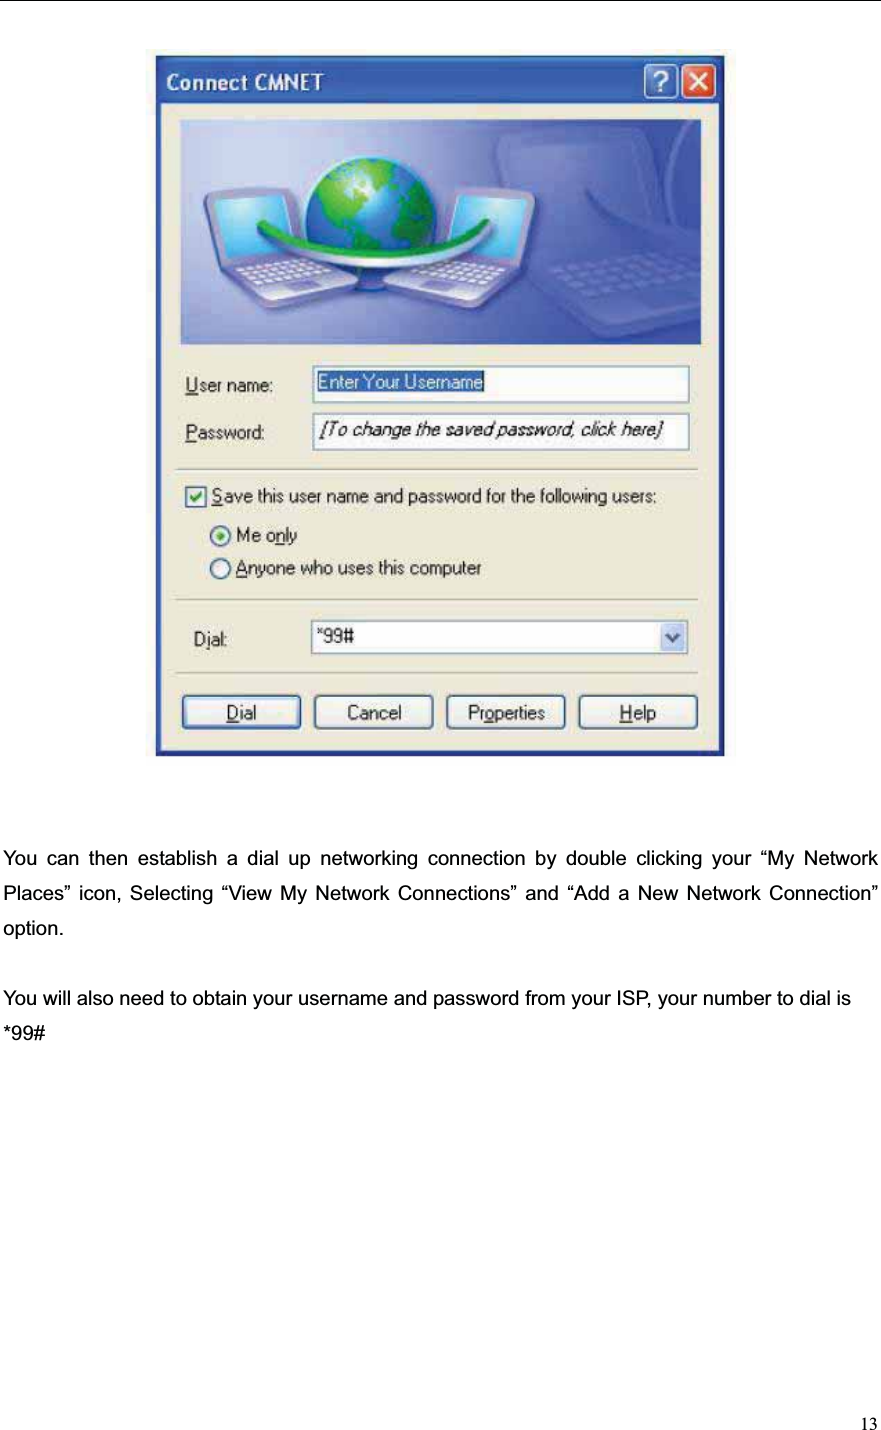 13You can then establish a dial up networking connection by double clicking your “My Network Places” icon, Selecting “View My Network Connections” and “Add a New Network Connection” option.  You will also need to obtain your username and password from your ISP, your number to dial is *99#